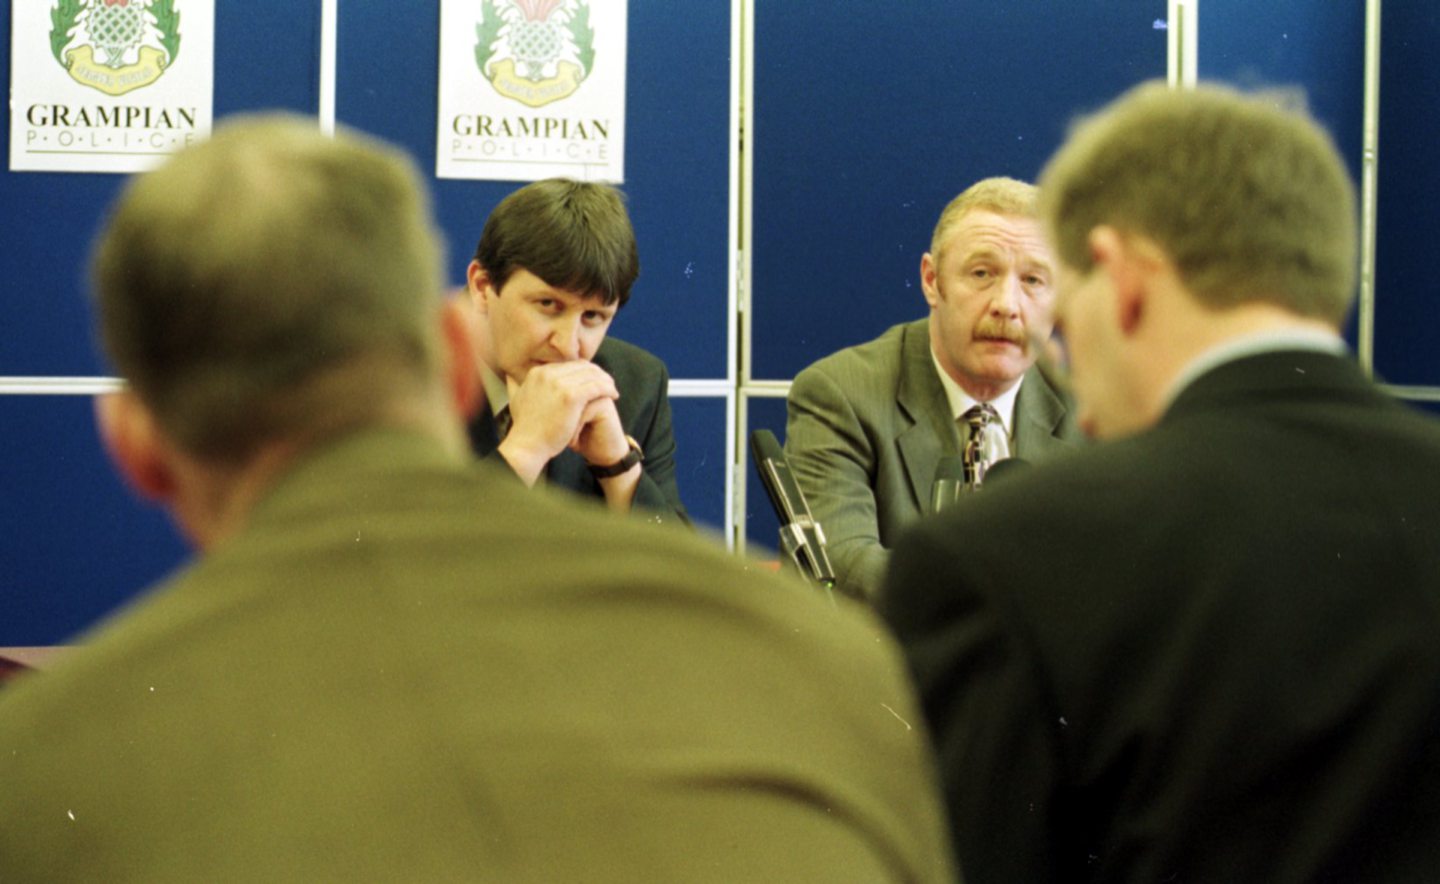 DCI Peter Simpson, right, and Alan Smith at a press conference during the Arlene Fraser investigation